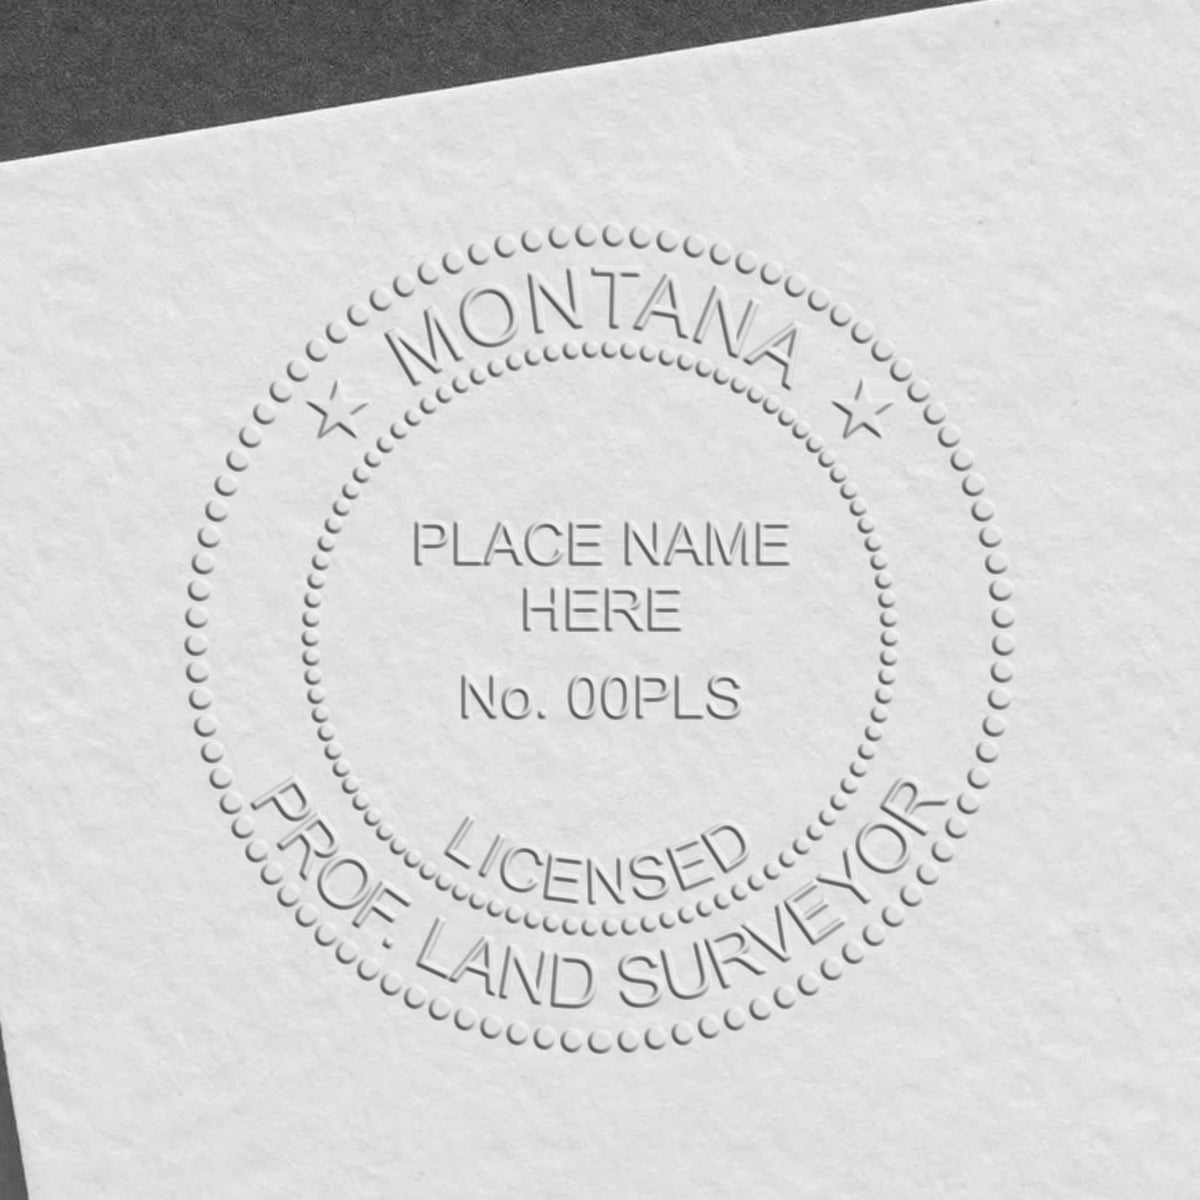 A stamped impression of the Handheld Montana Land Surveyor Seal in this stylish lifestyle photo, setting the tone for a unique and personalized product.